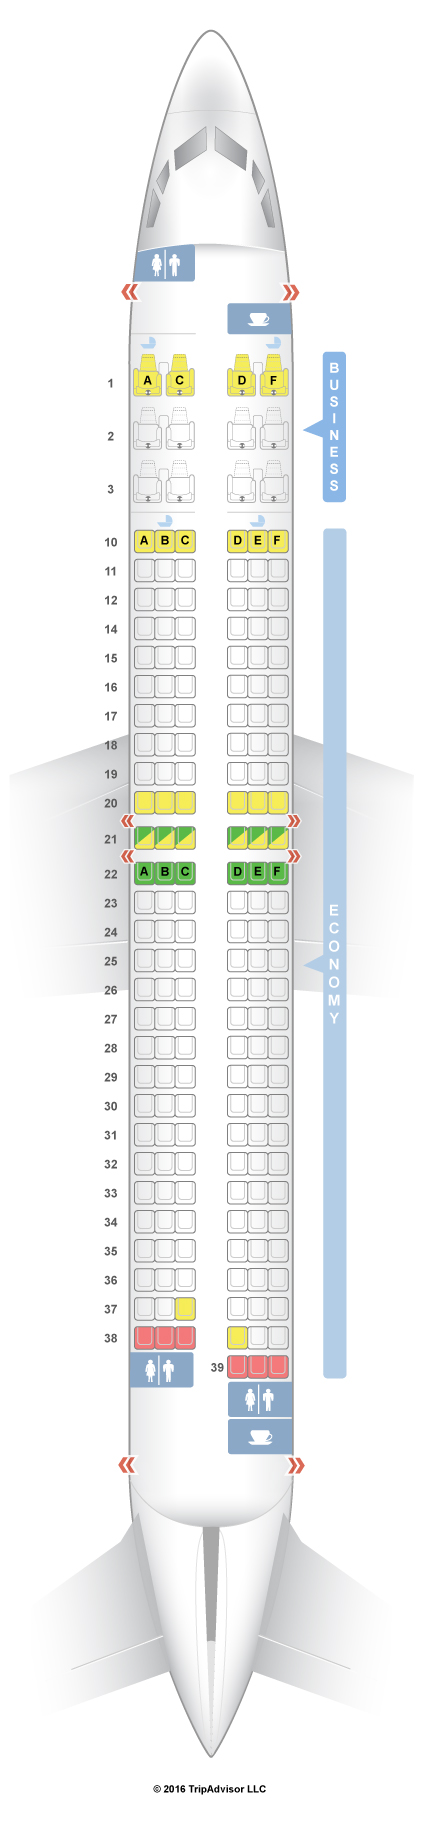 United Airlines Seating Chart 737 900